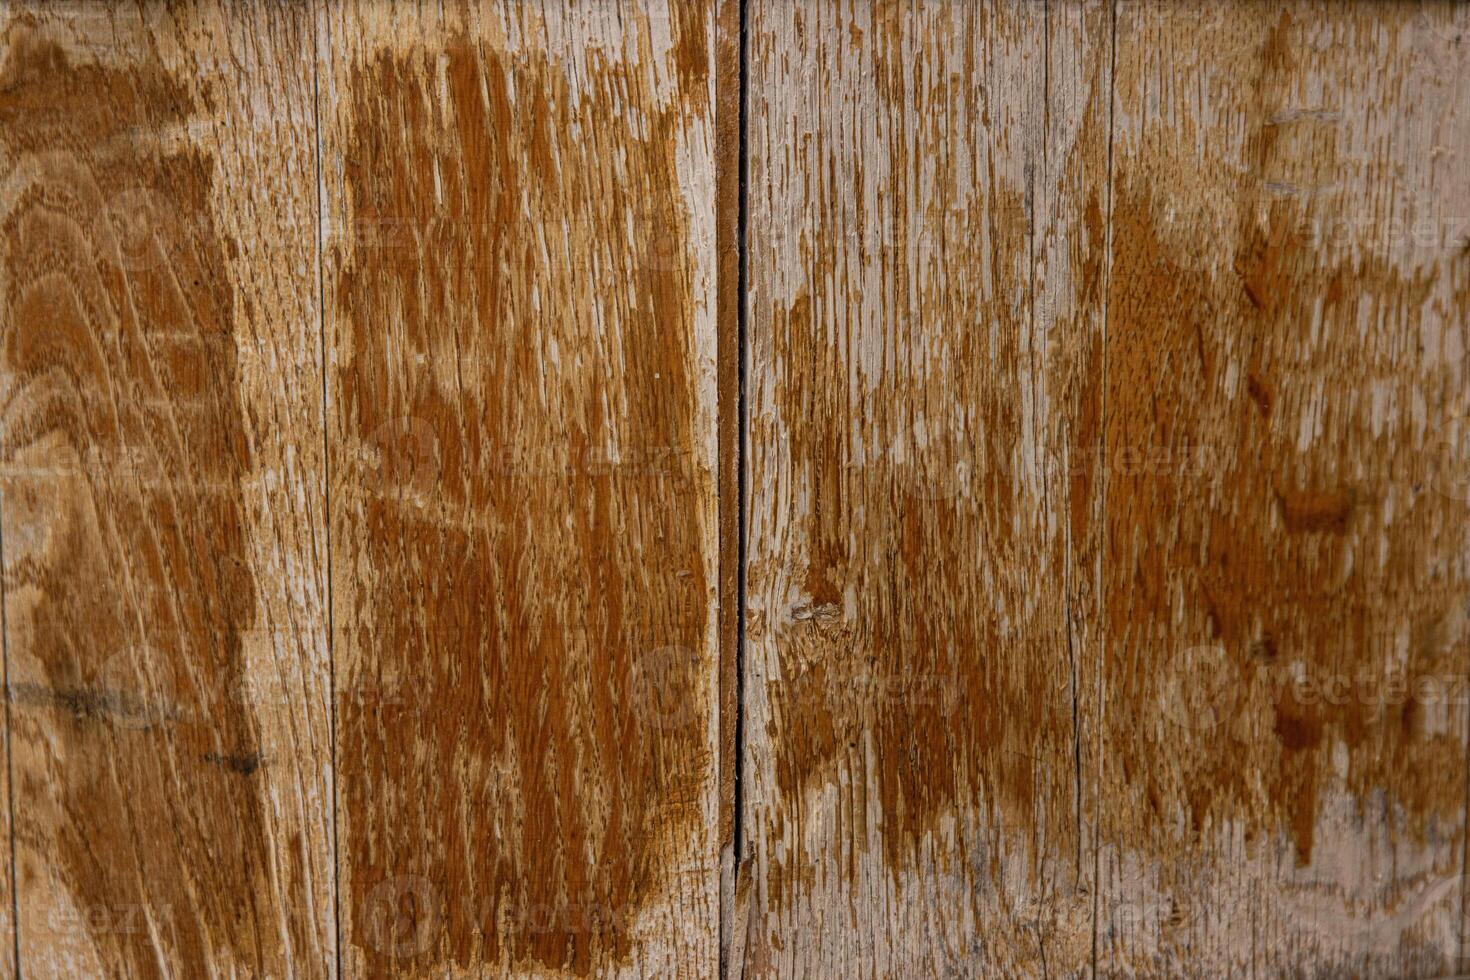 Vintage brown barrel wooden planks background texture with scratches and black stains over wood grain of old aged oak barrel bottom, close up photo